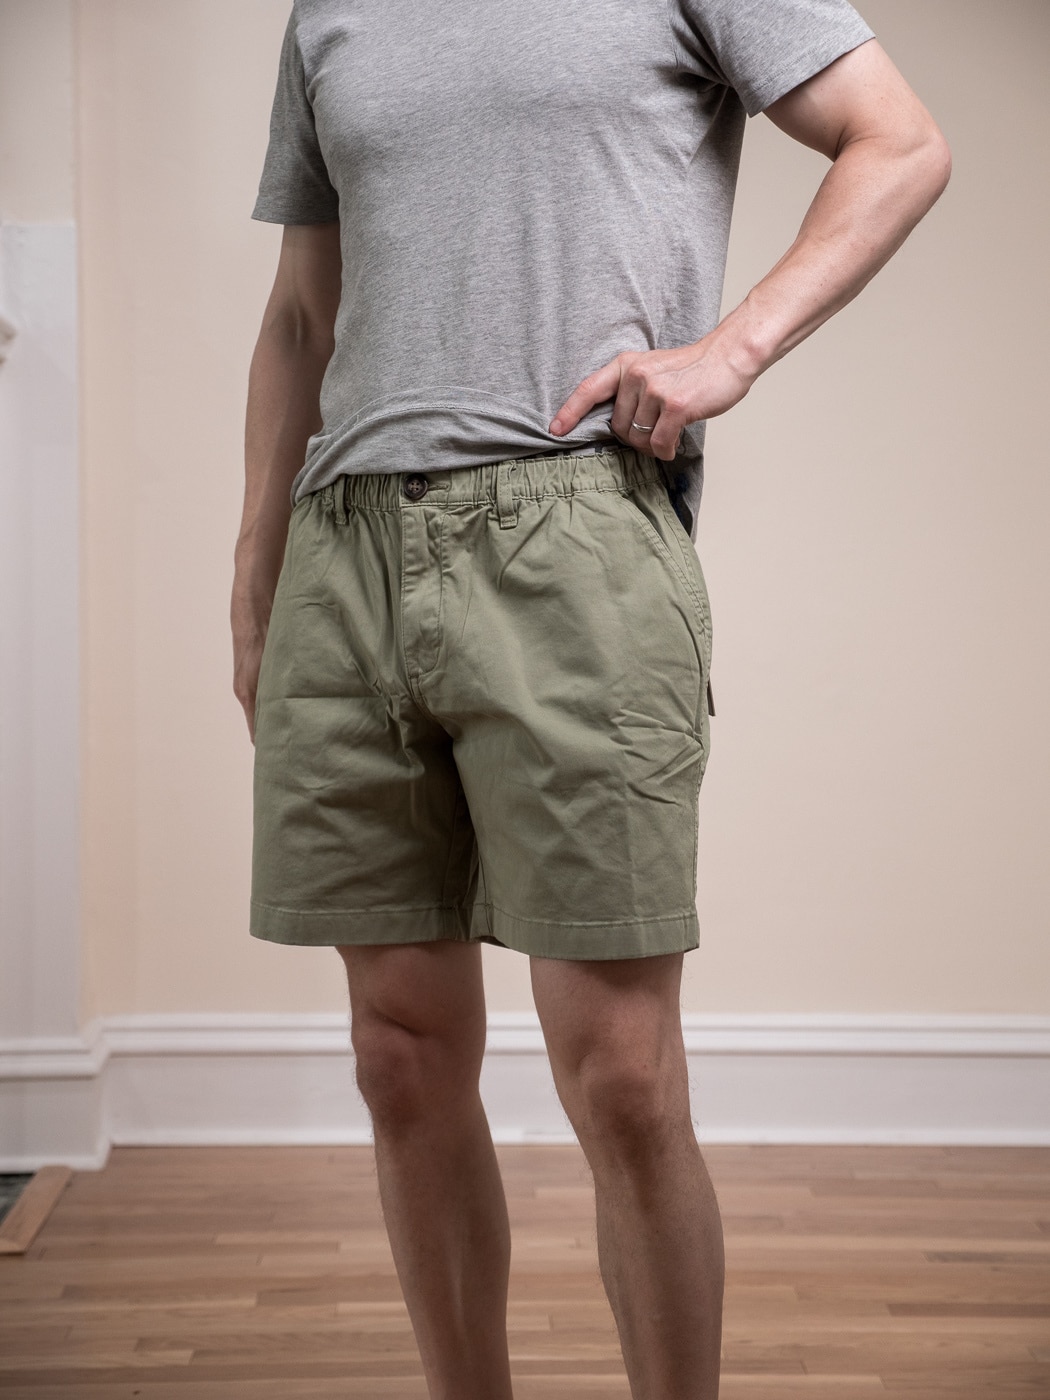 Chubbies Review: Why Does Everyone Love These Shorts?